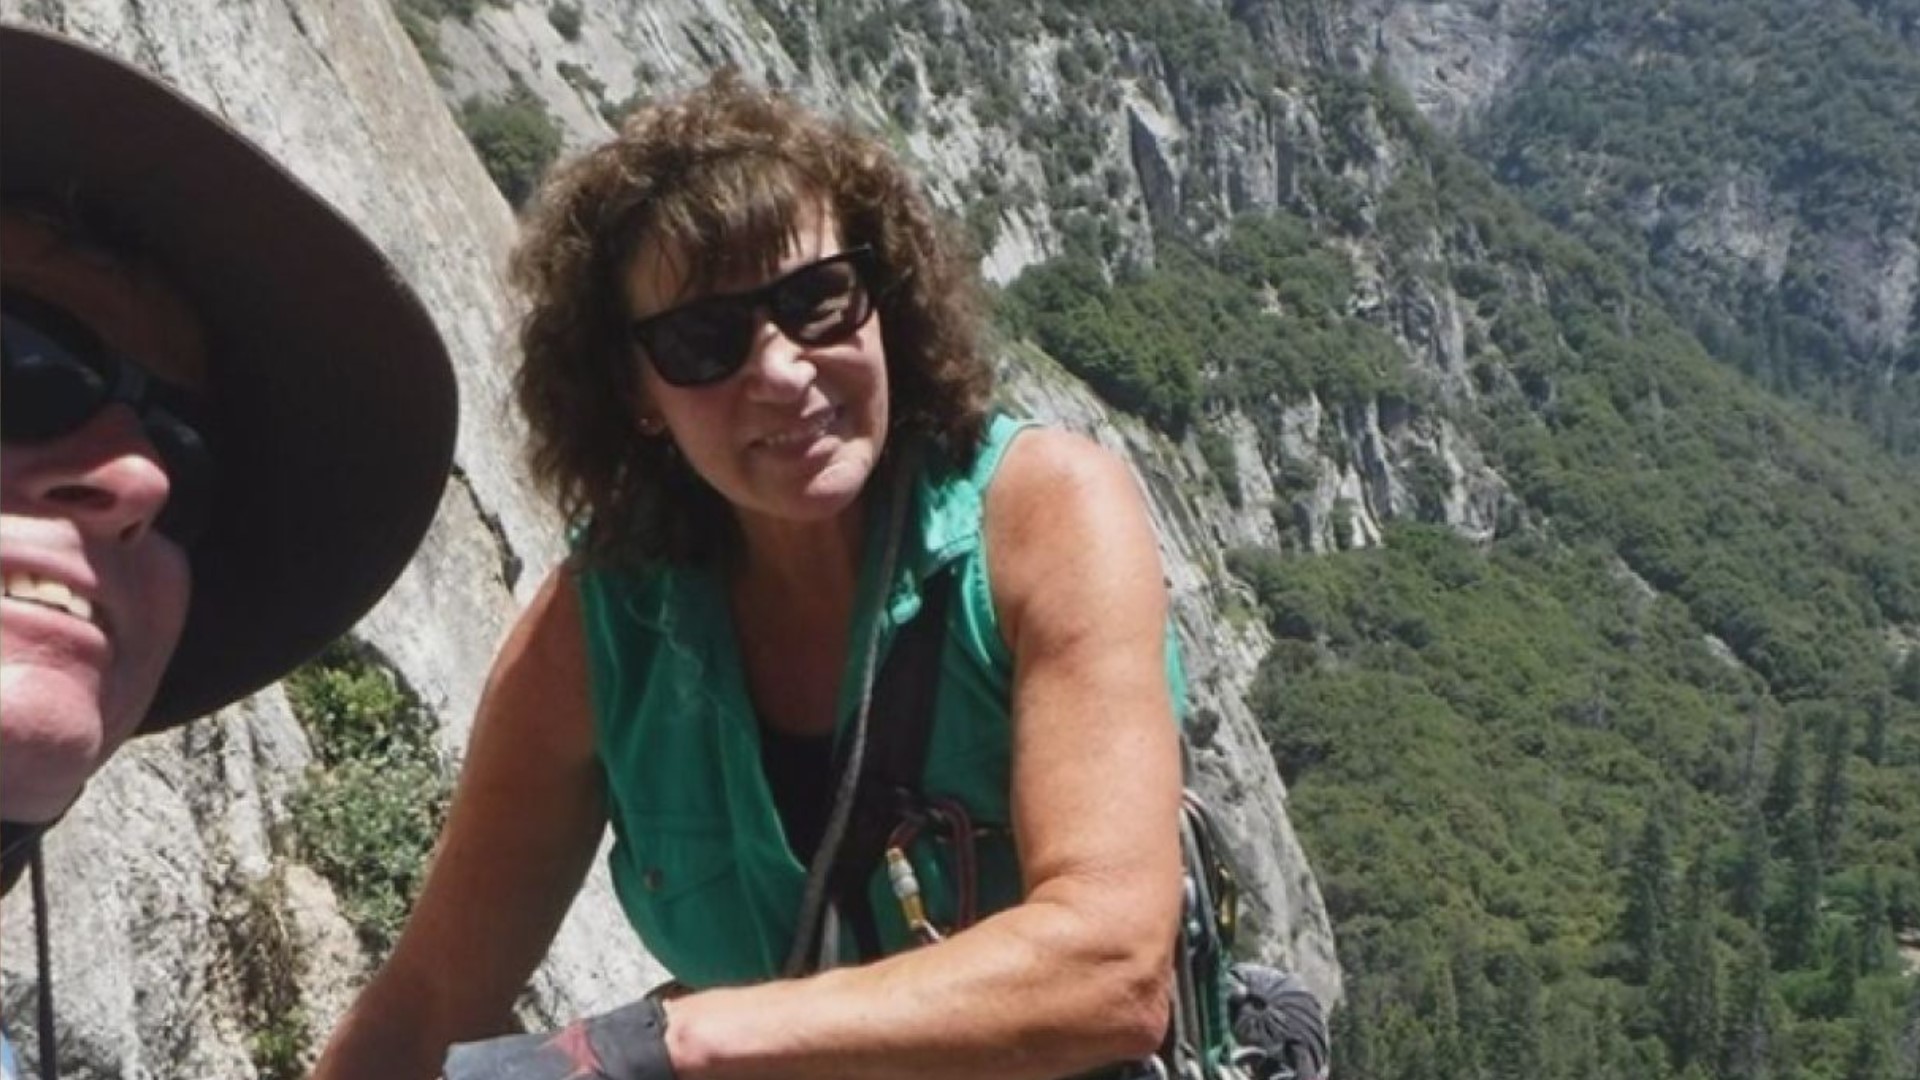 Patricia Stoops was a rock climber and a "rock" to many that she came across. The Modesto teacher at Glick Middle School leaves behind her desire to help others after dying while rock climbing in Yosemite.